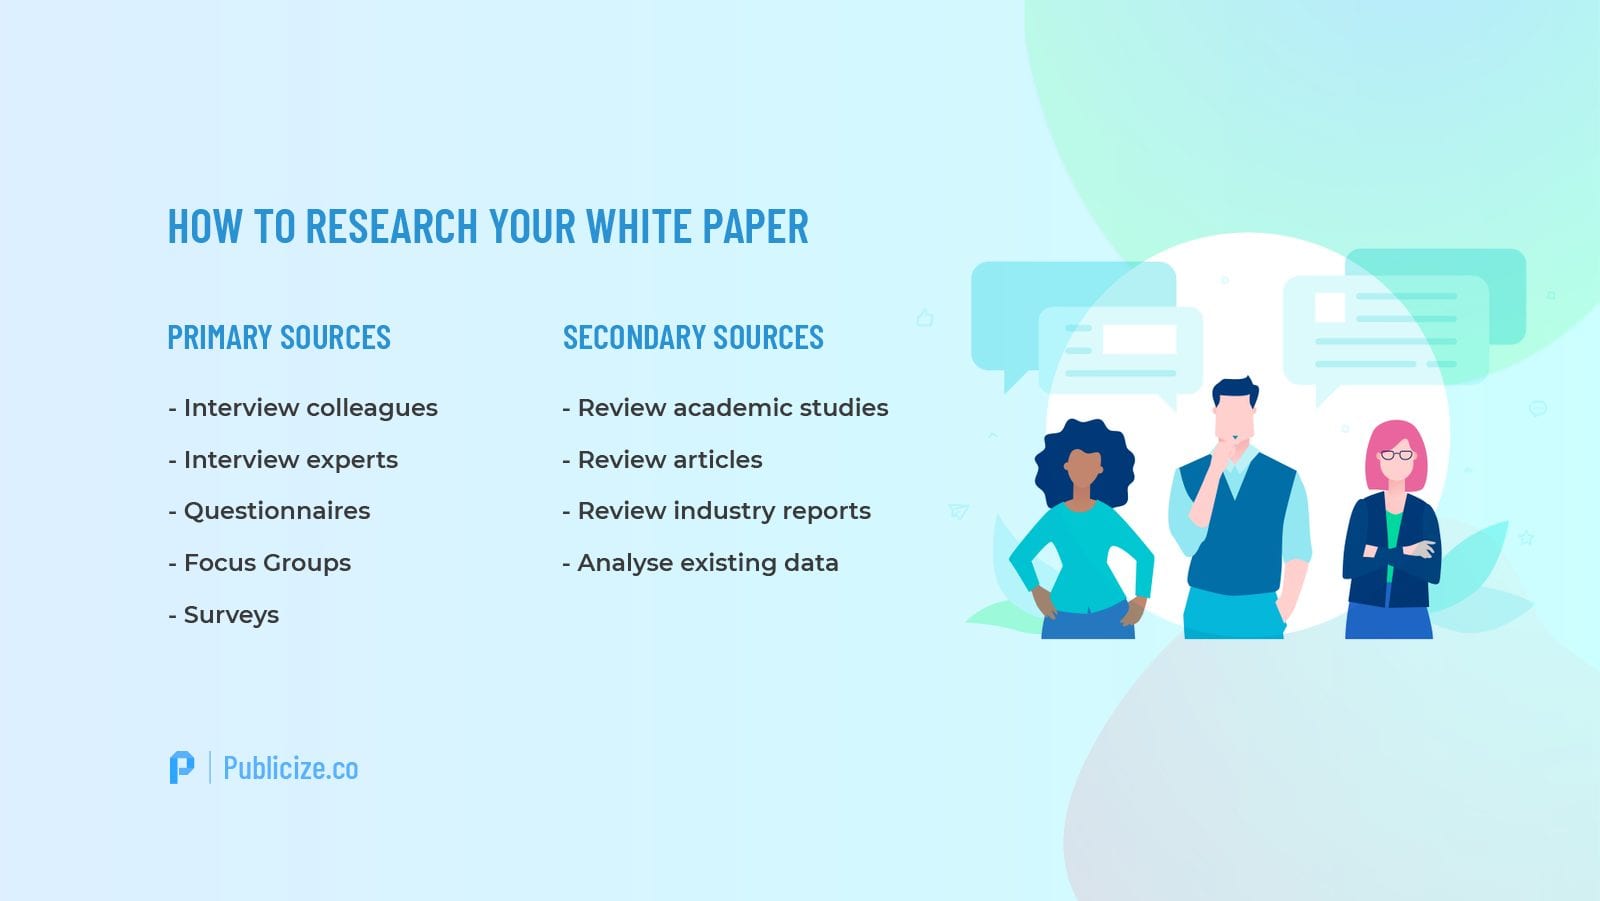 How to research a white paper infographic